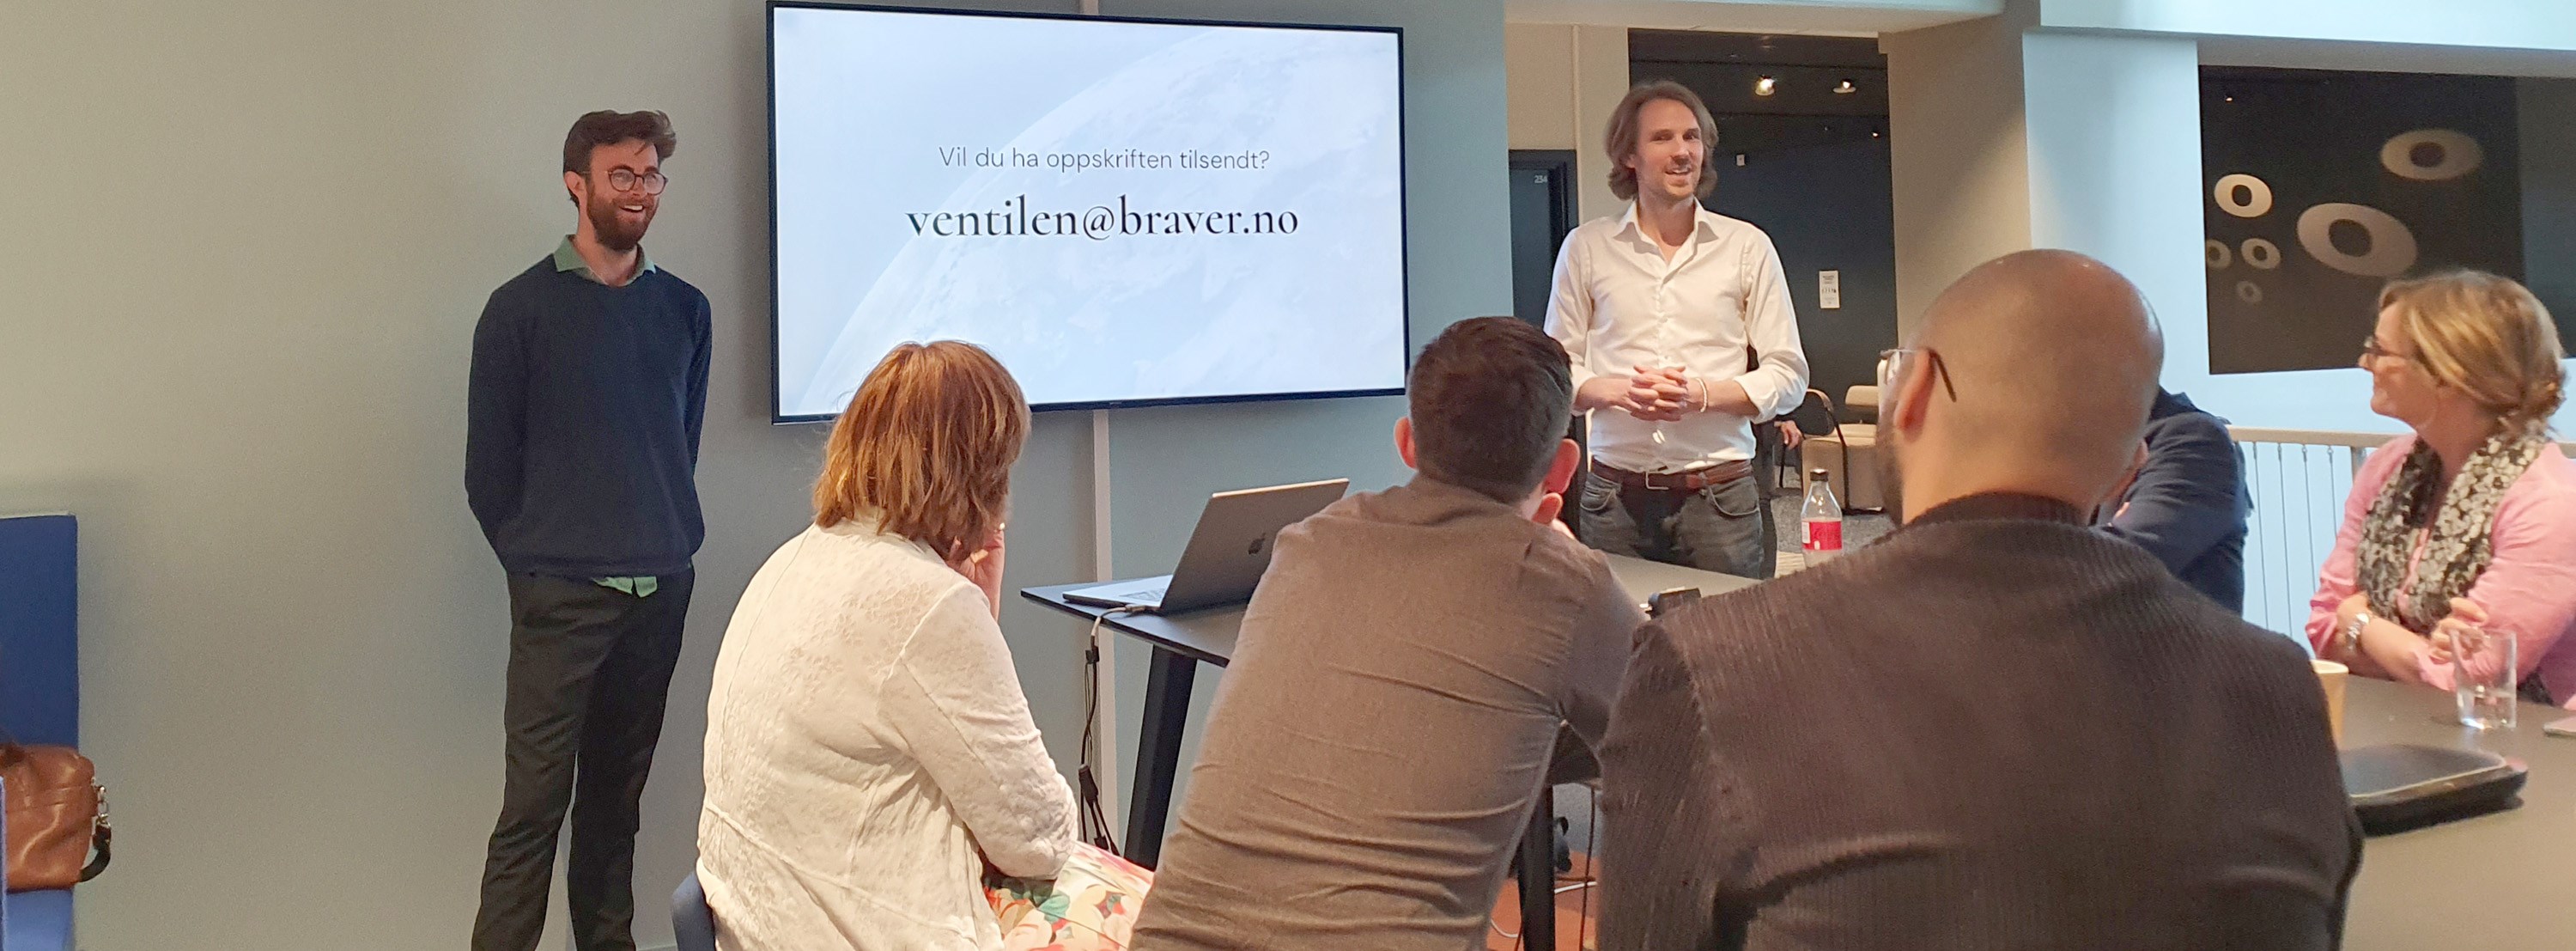 Jacob Mørch and Christer Dalsbøe in the start-up Braver , The HUB Corporate workshop 24 may 2022.